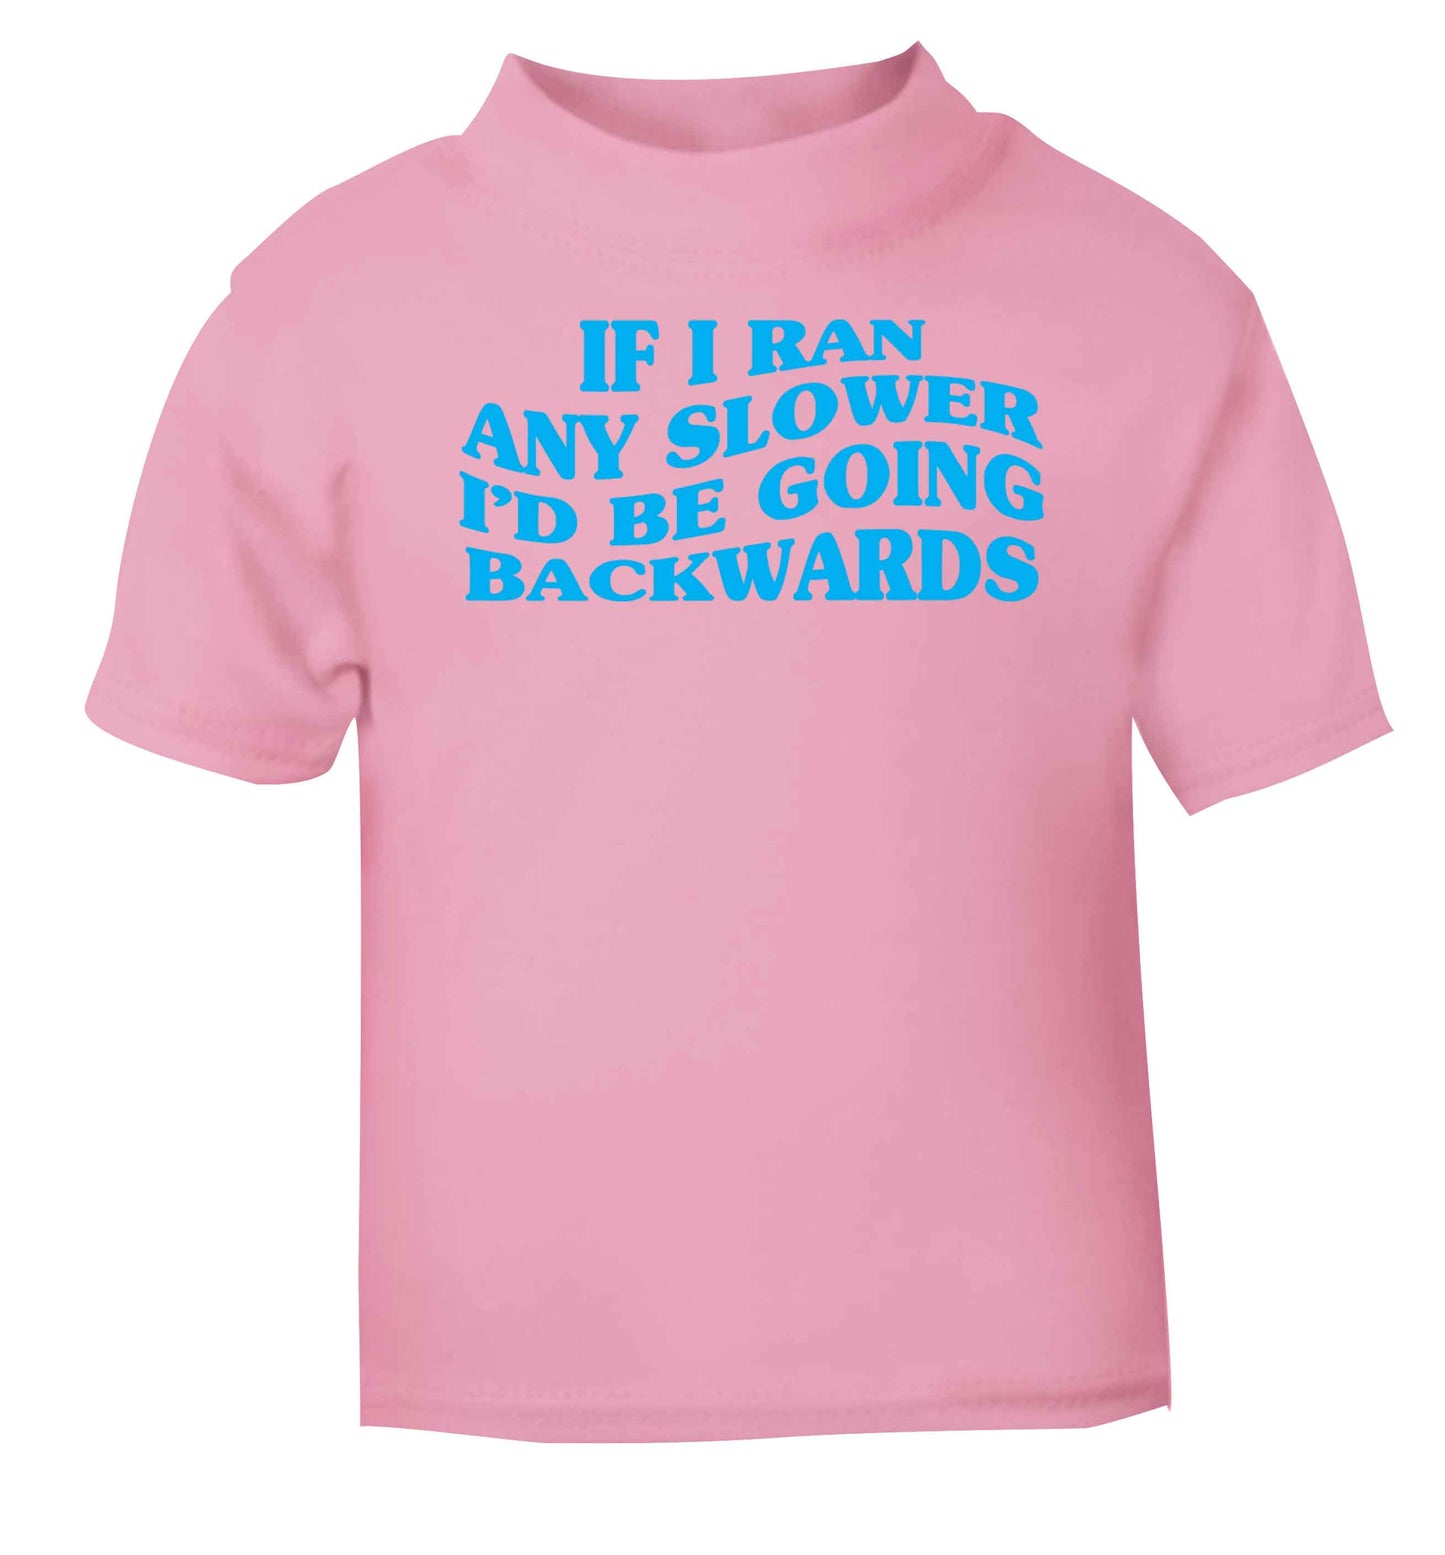 If I ran any slower I'd be going backwards light pink baby toddler Tshirt 2 Years